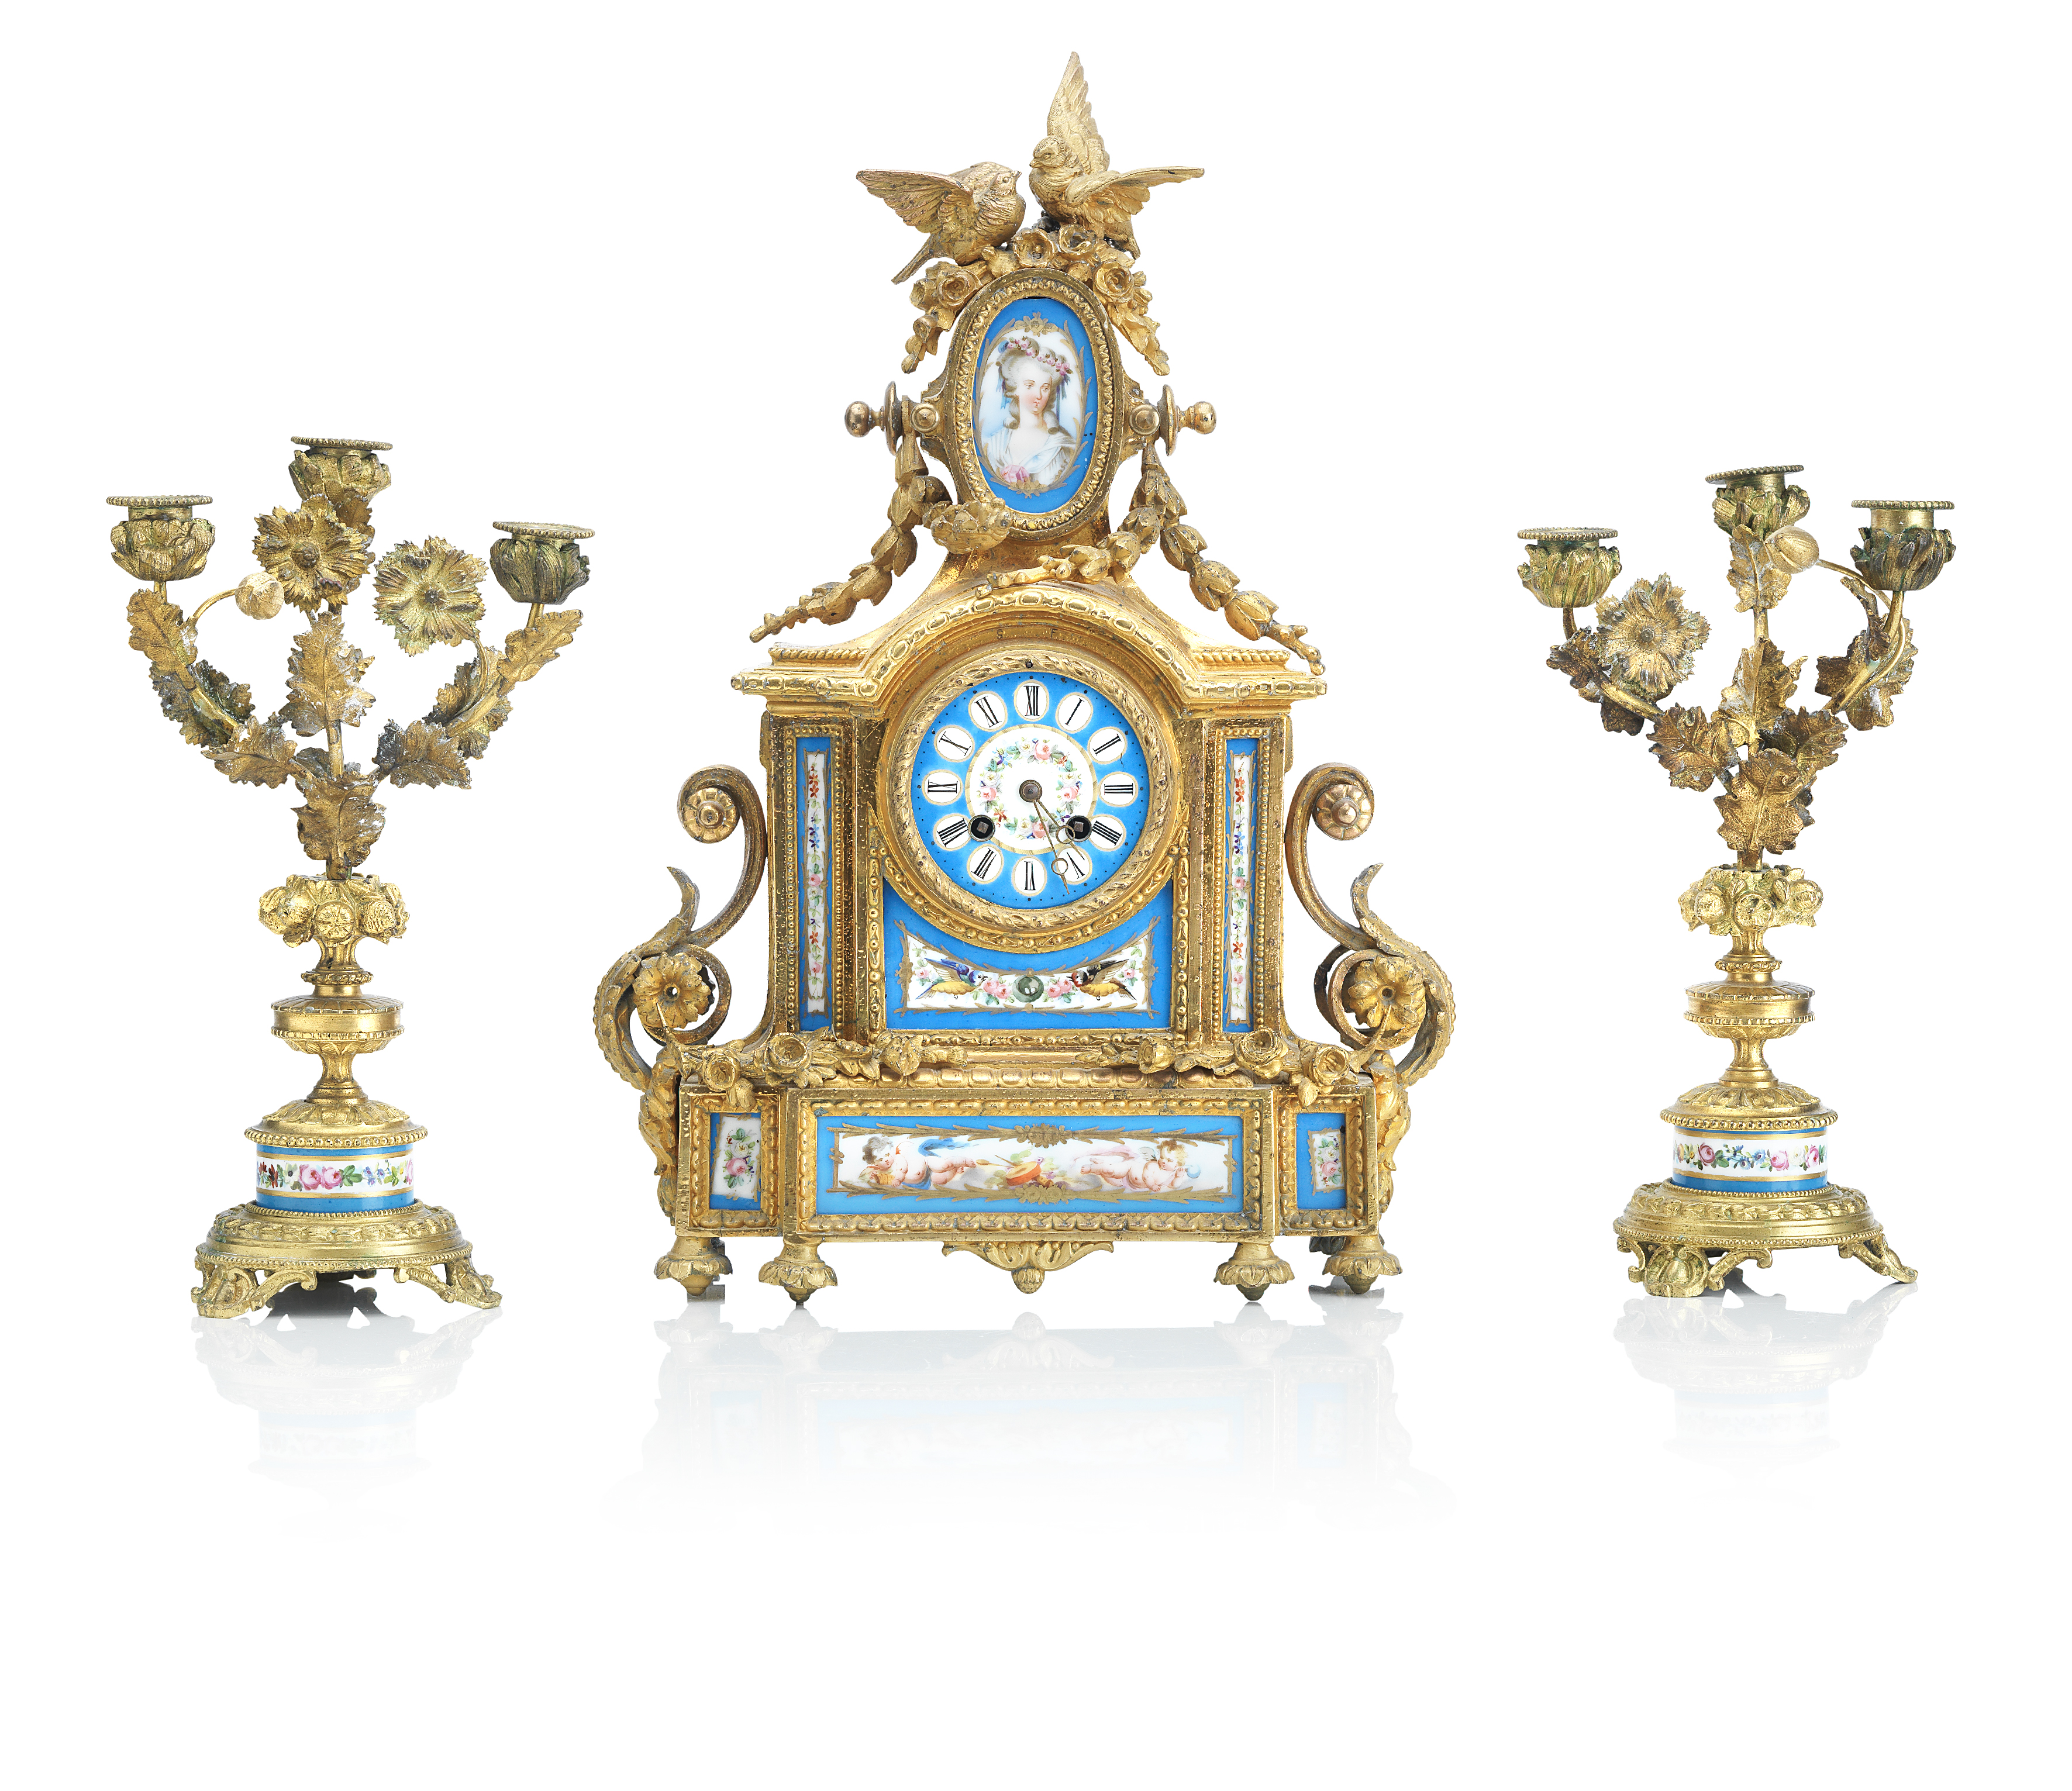 A 19th century French Sevres-style porcelain and gilt metal mounted clock garniture